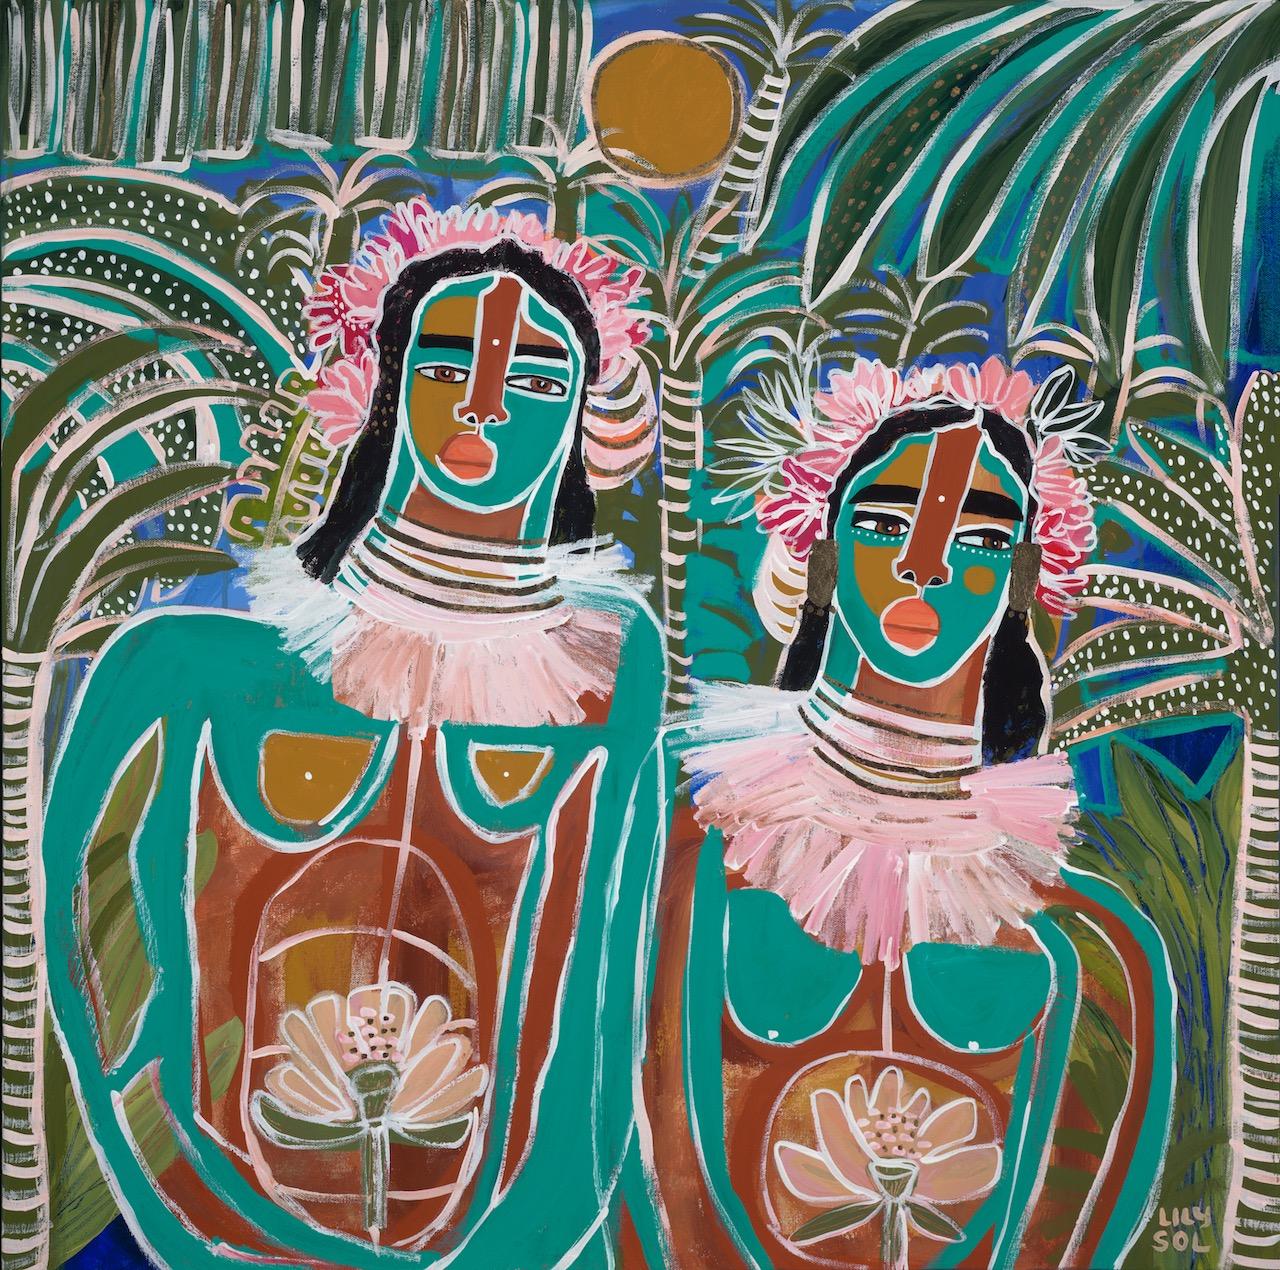 Lily Sol Figurative Painting - "Blooming Together" contemporary oil painting of women with teal painted skin